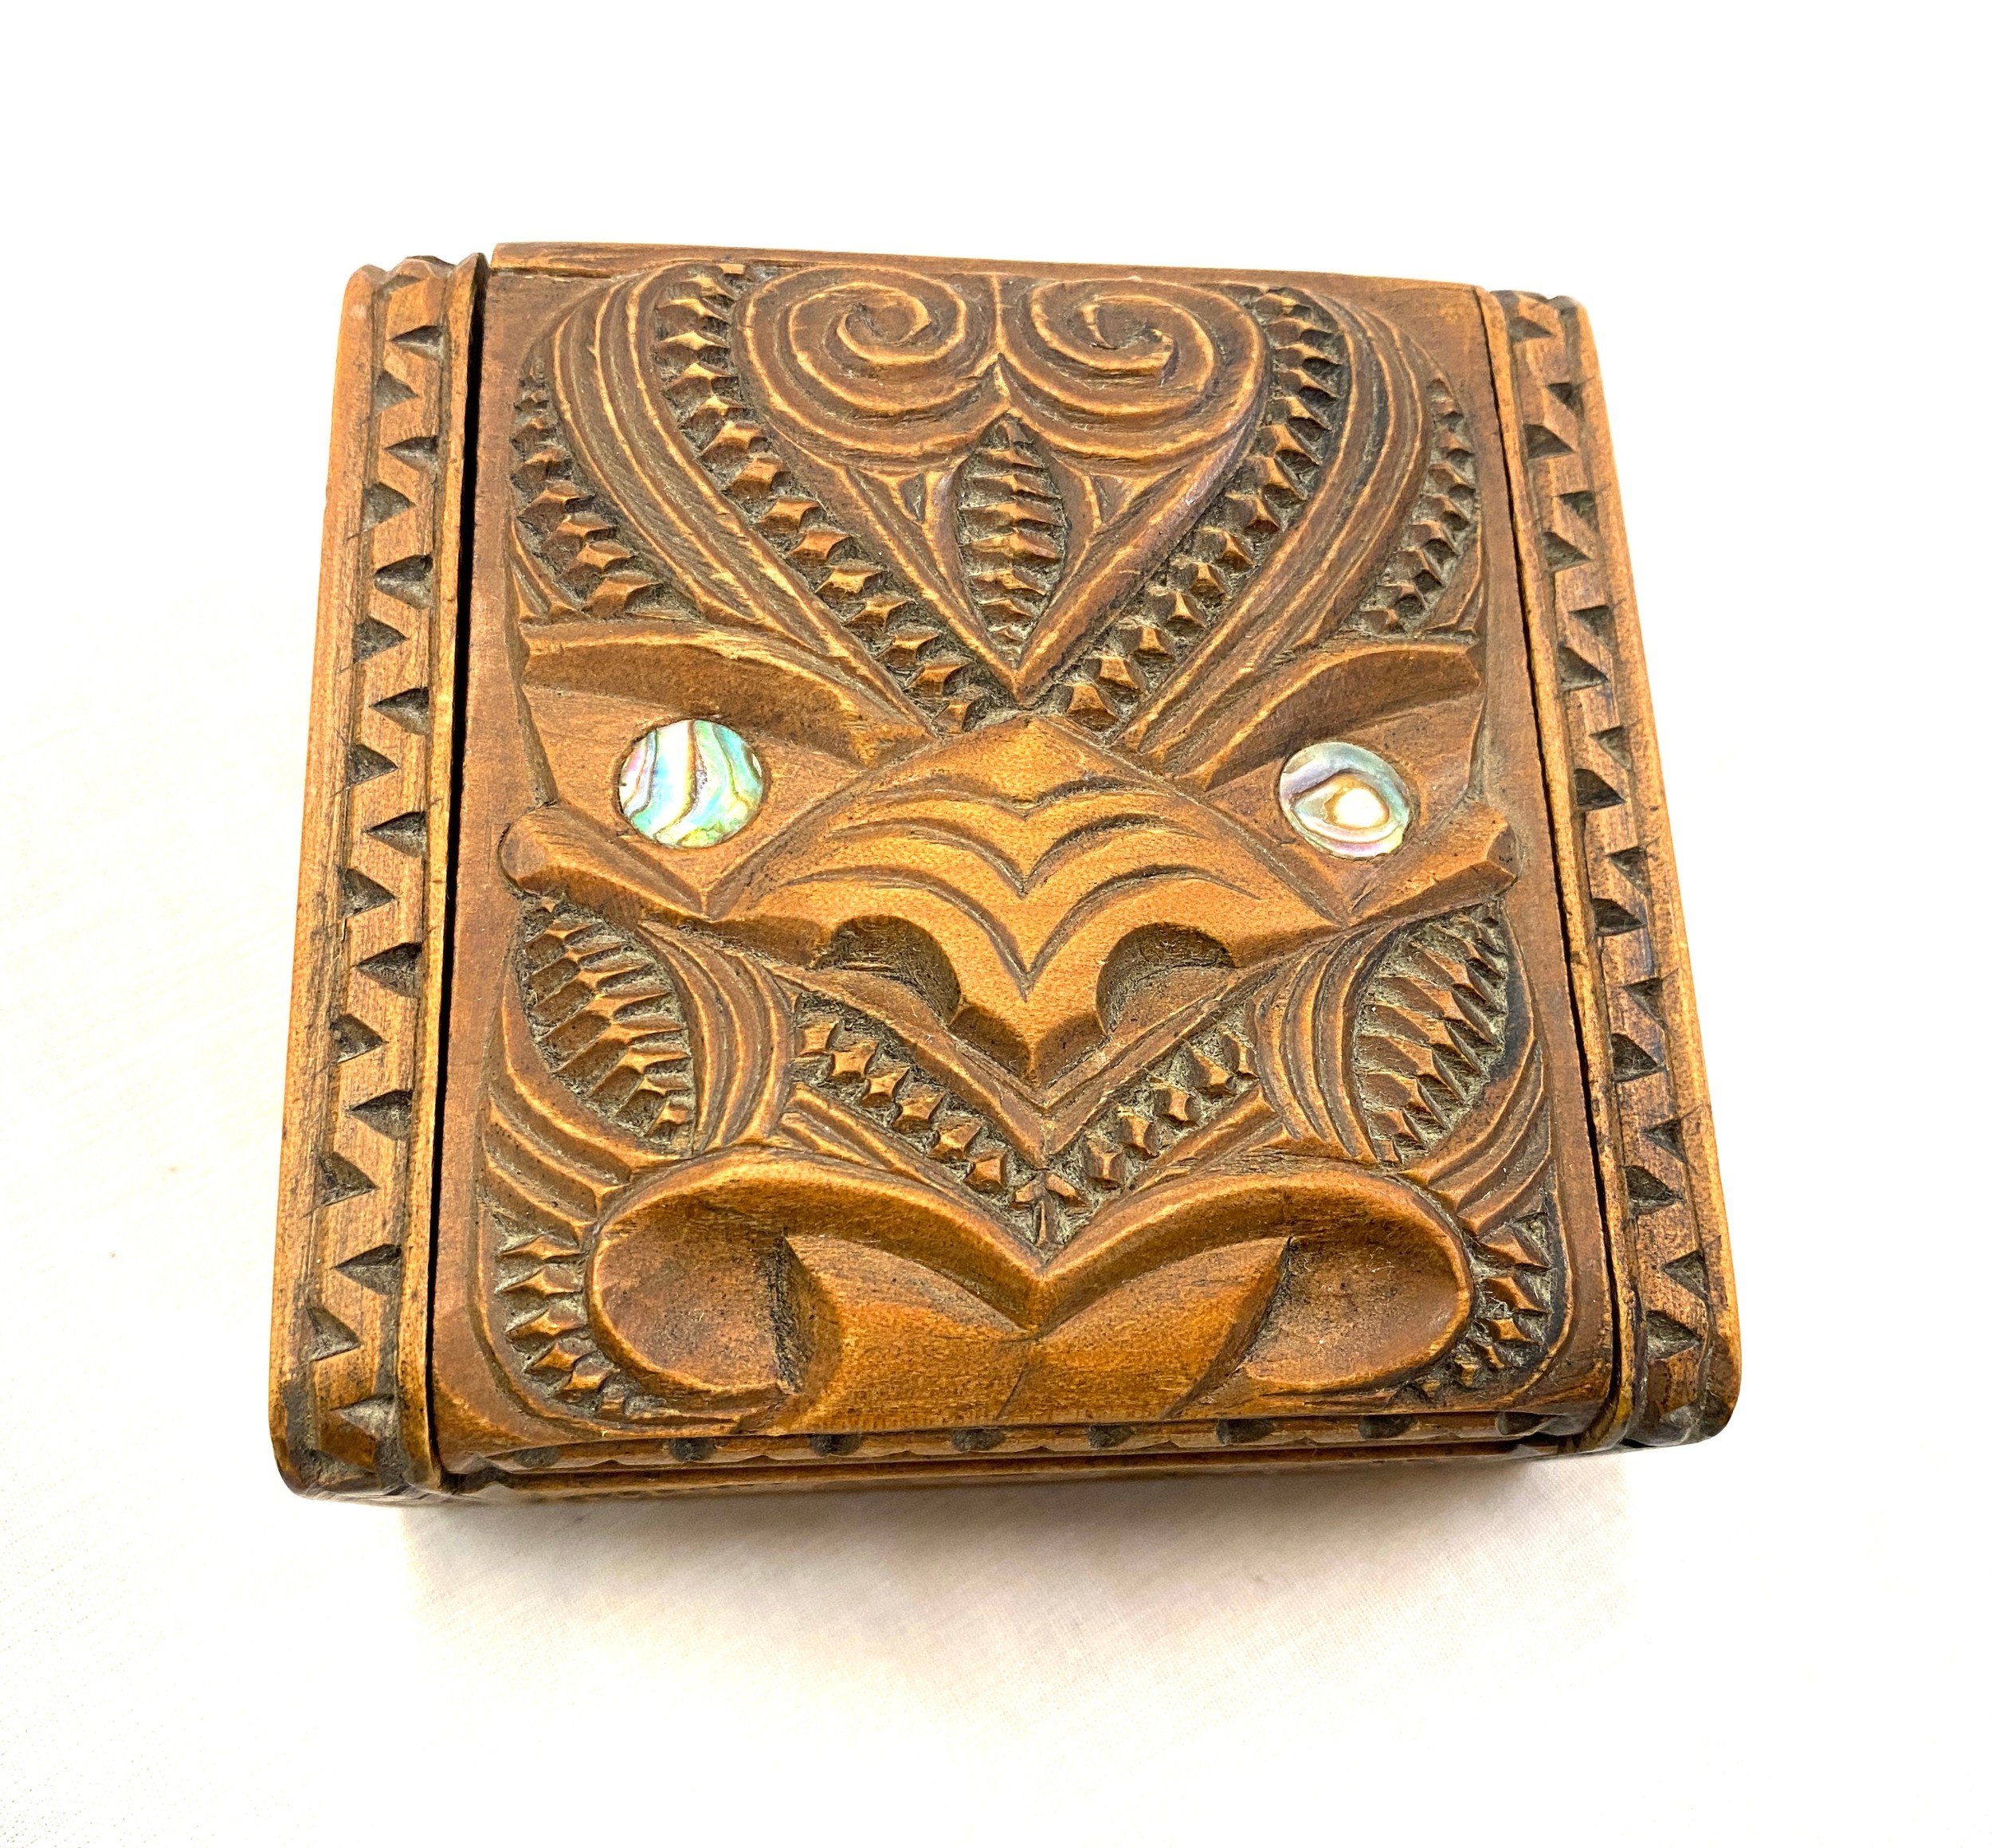 Carved New Zealand Maori box with Tiki lid and Paua shell eyes